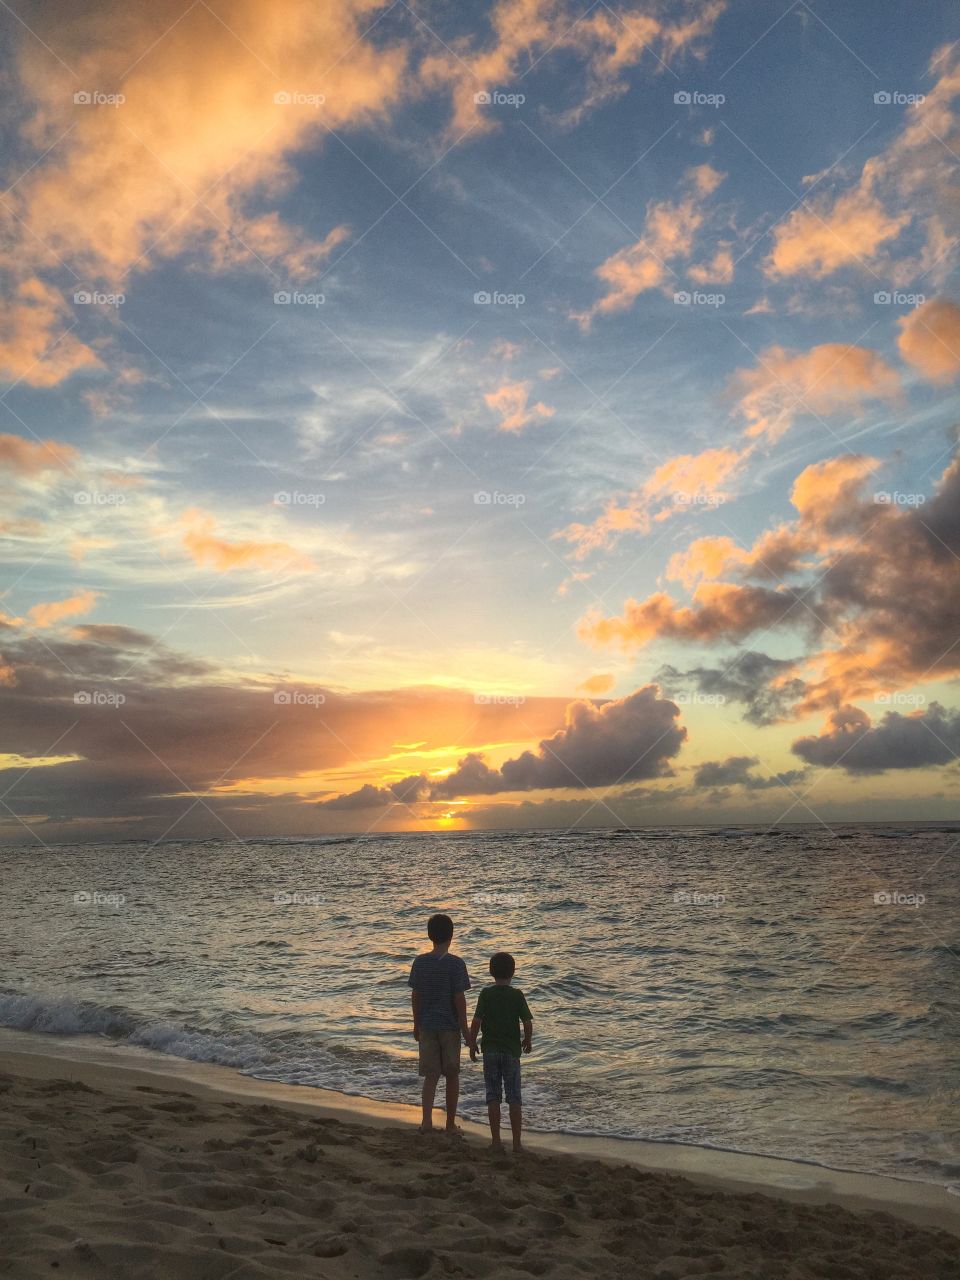 My boys watching the sun go down (and turtles playing in the water!), Oahu